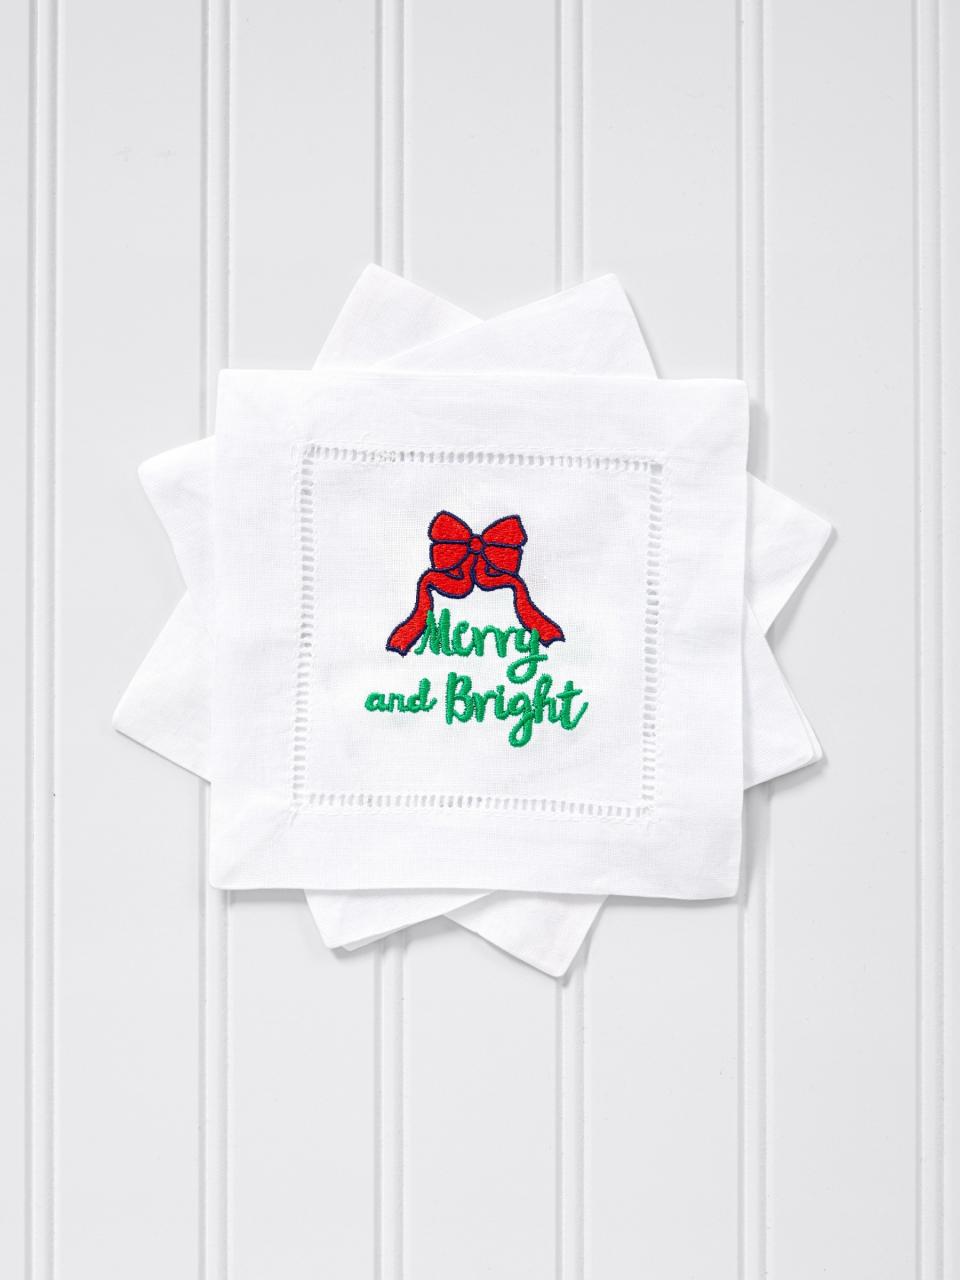 4) Merry And Bright Cocktail Napkin Set